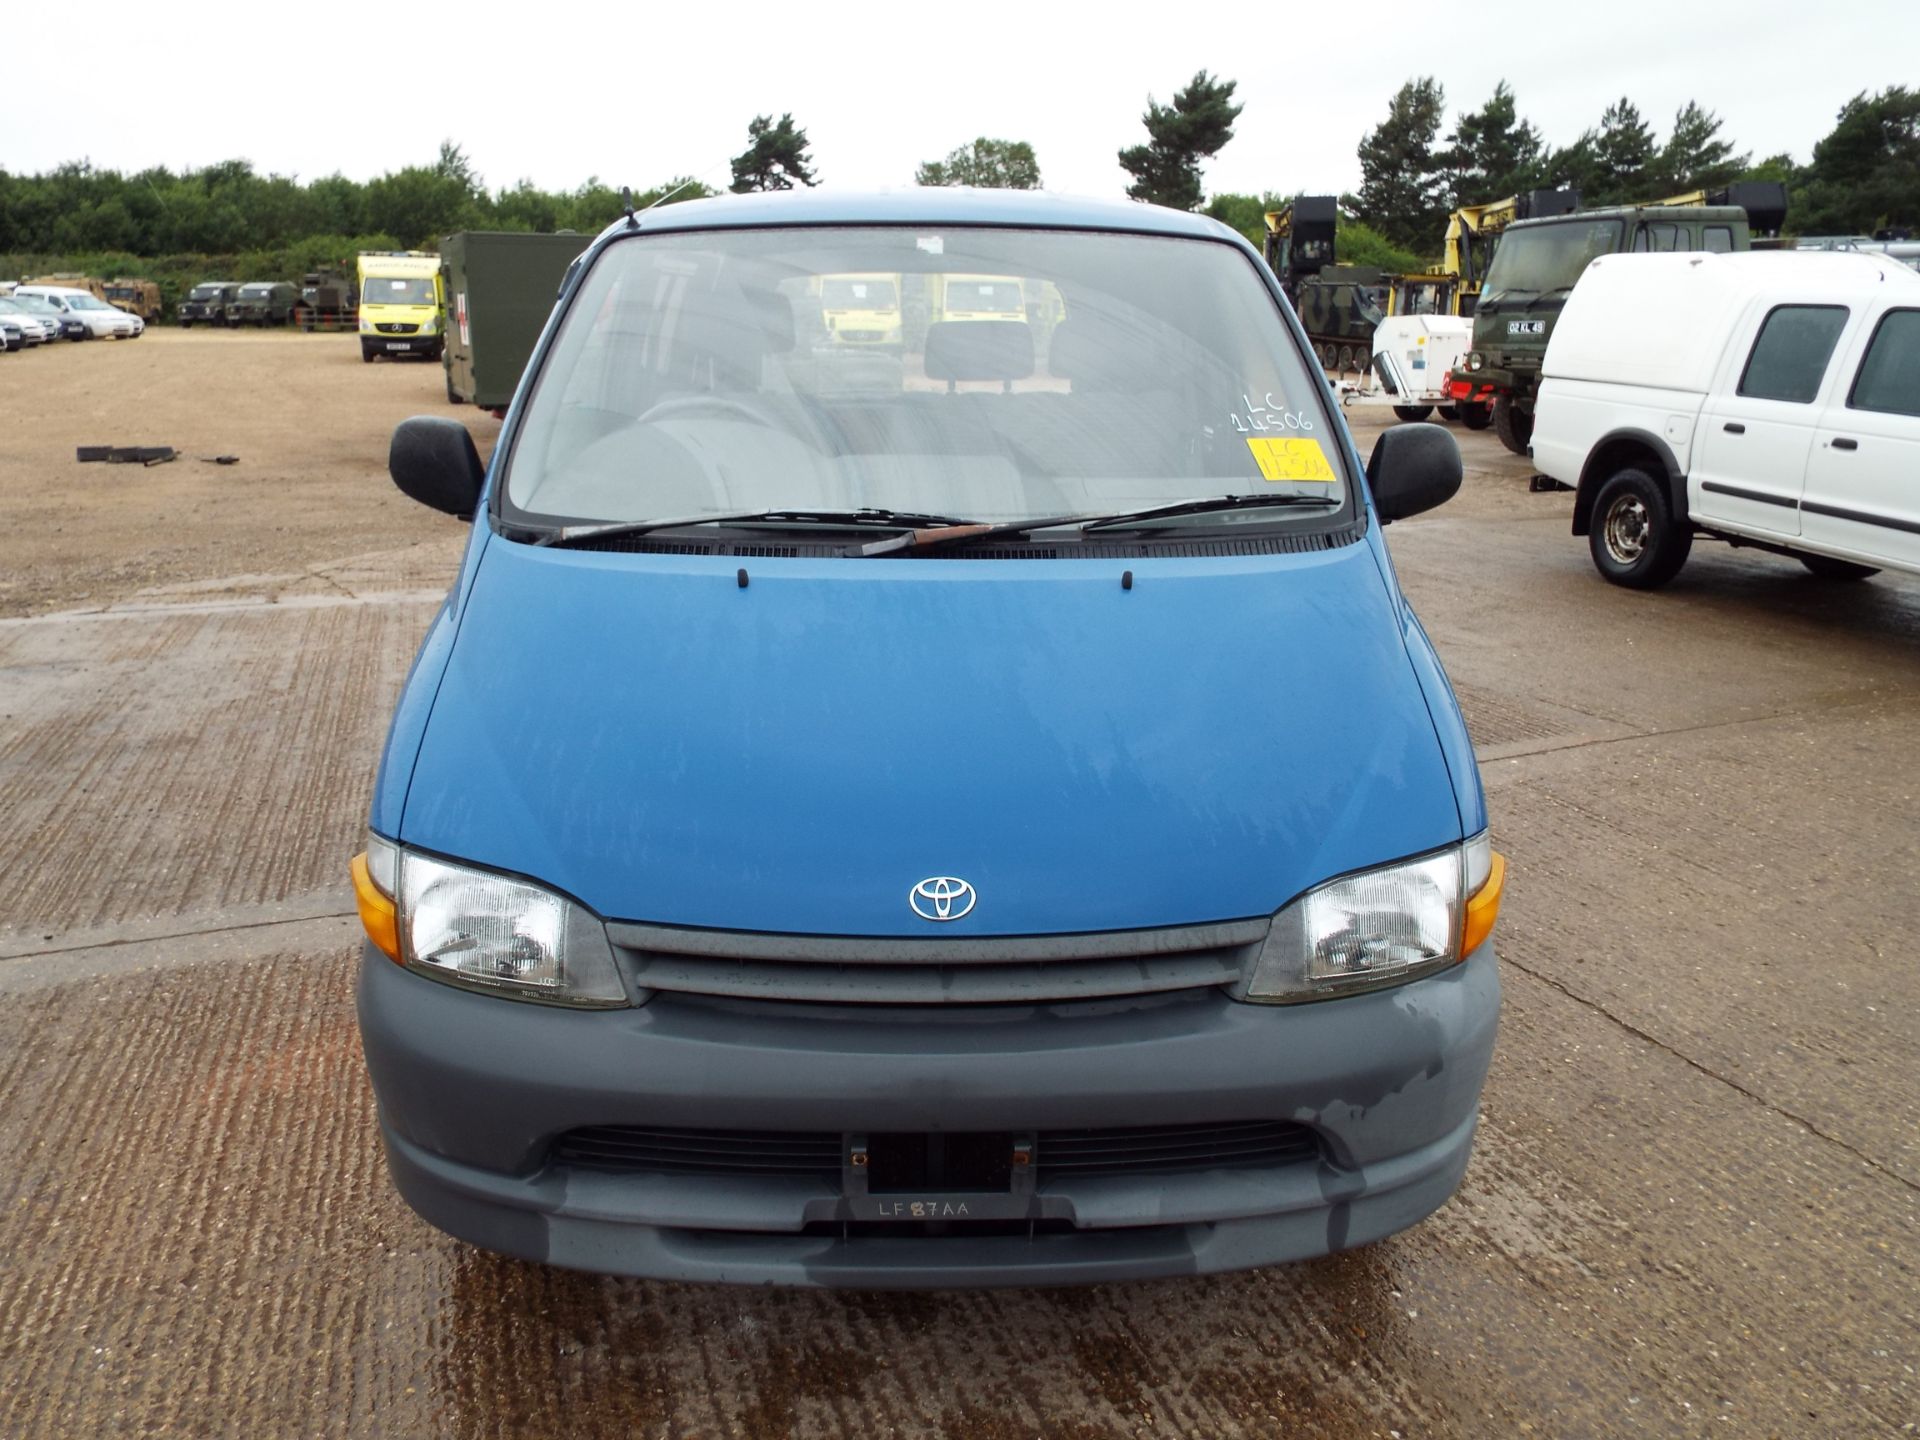 Toyota Hiace 2.4 D - Image 2 of 21